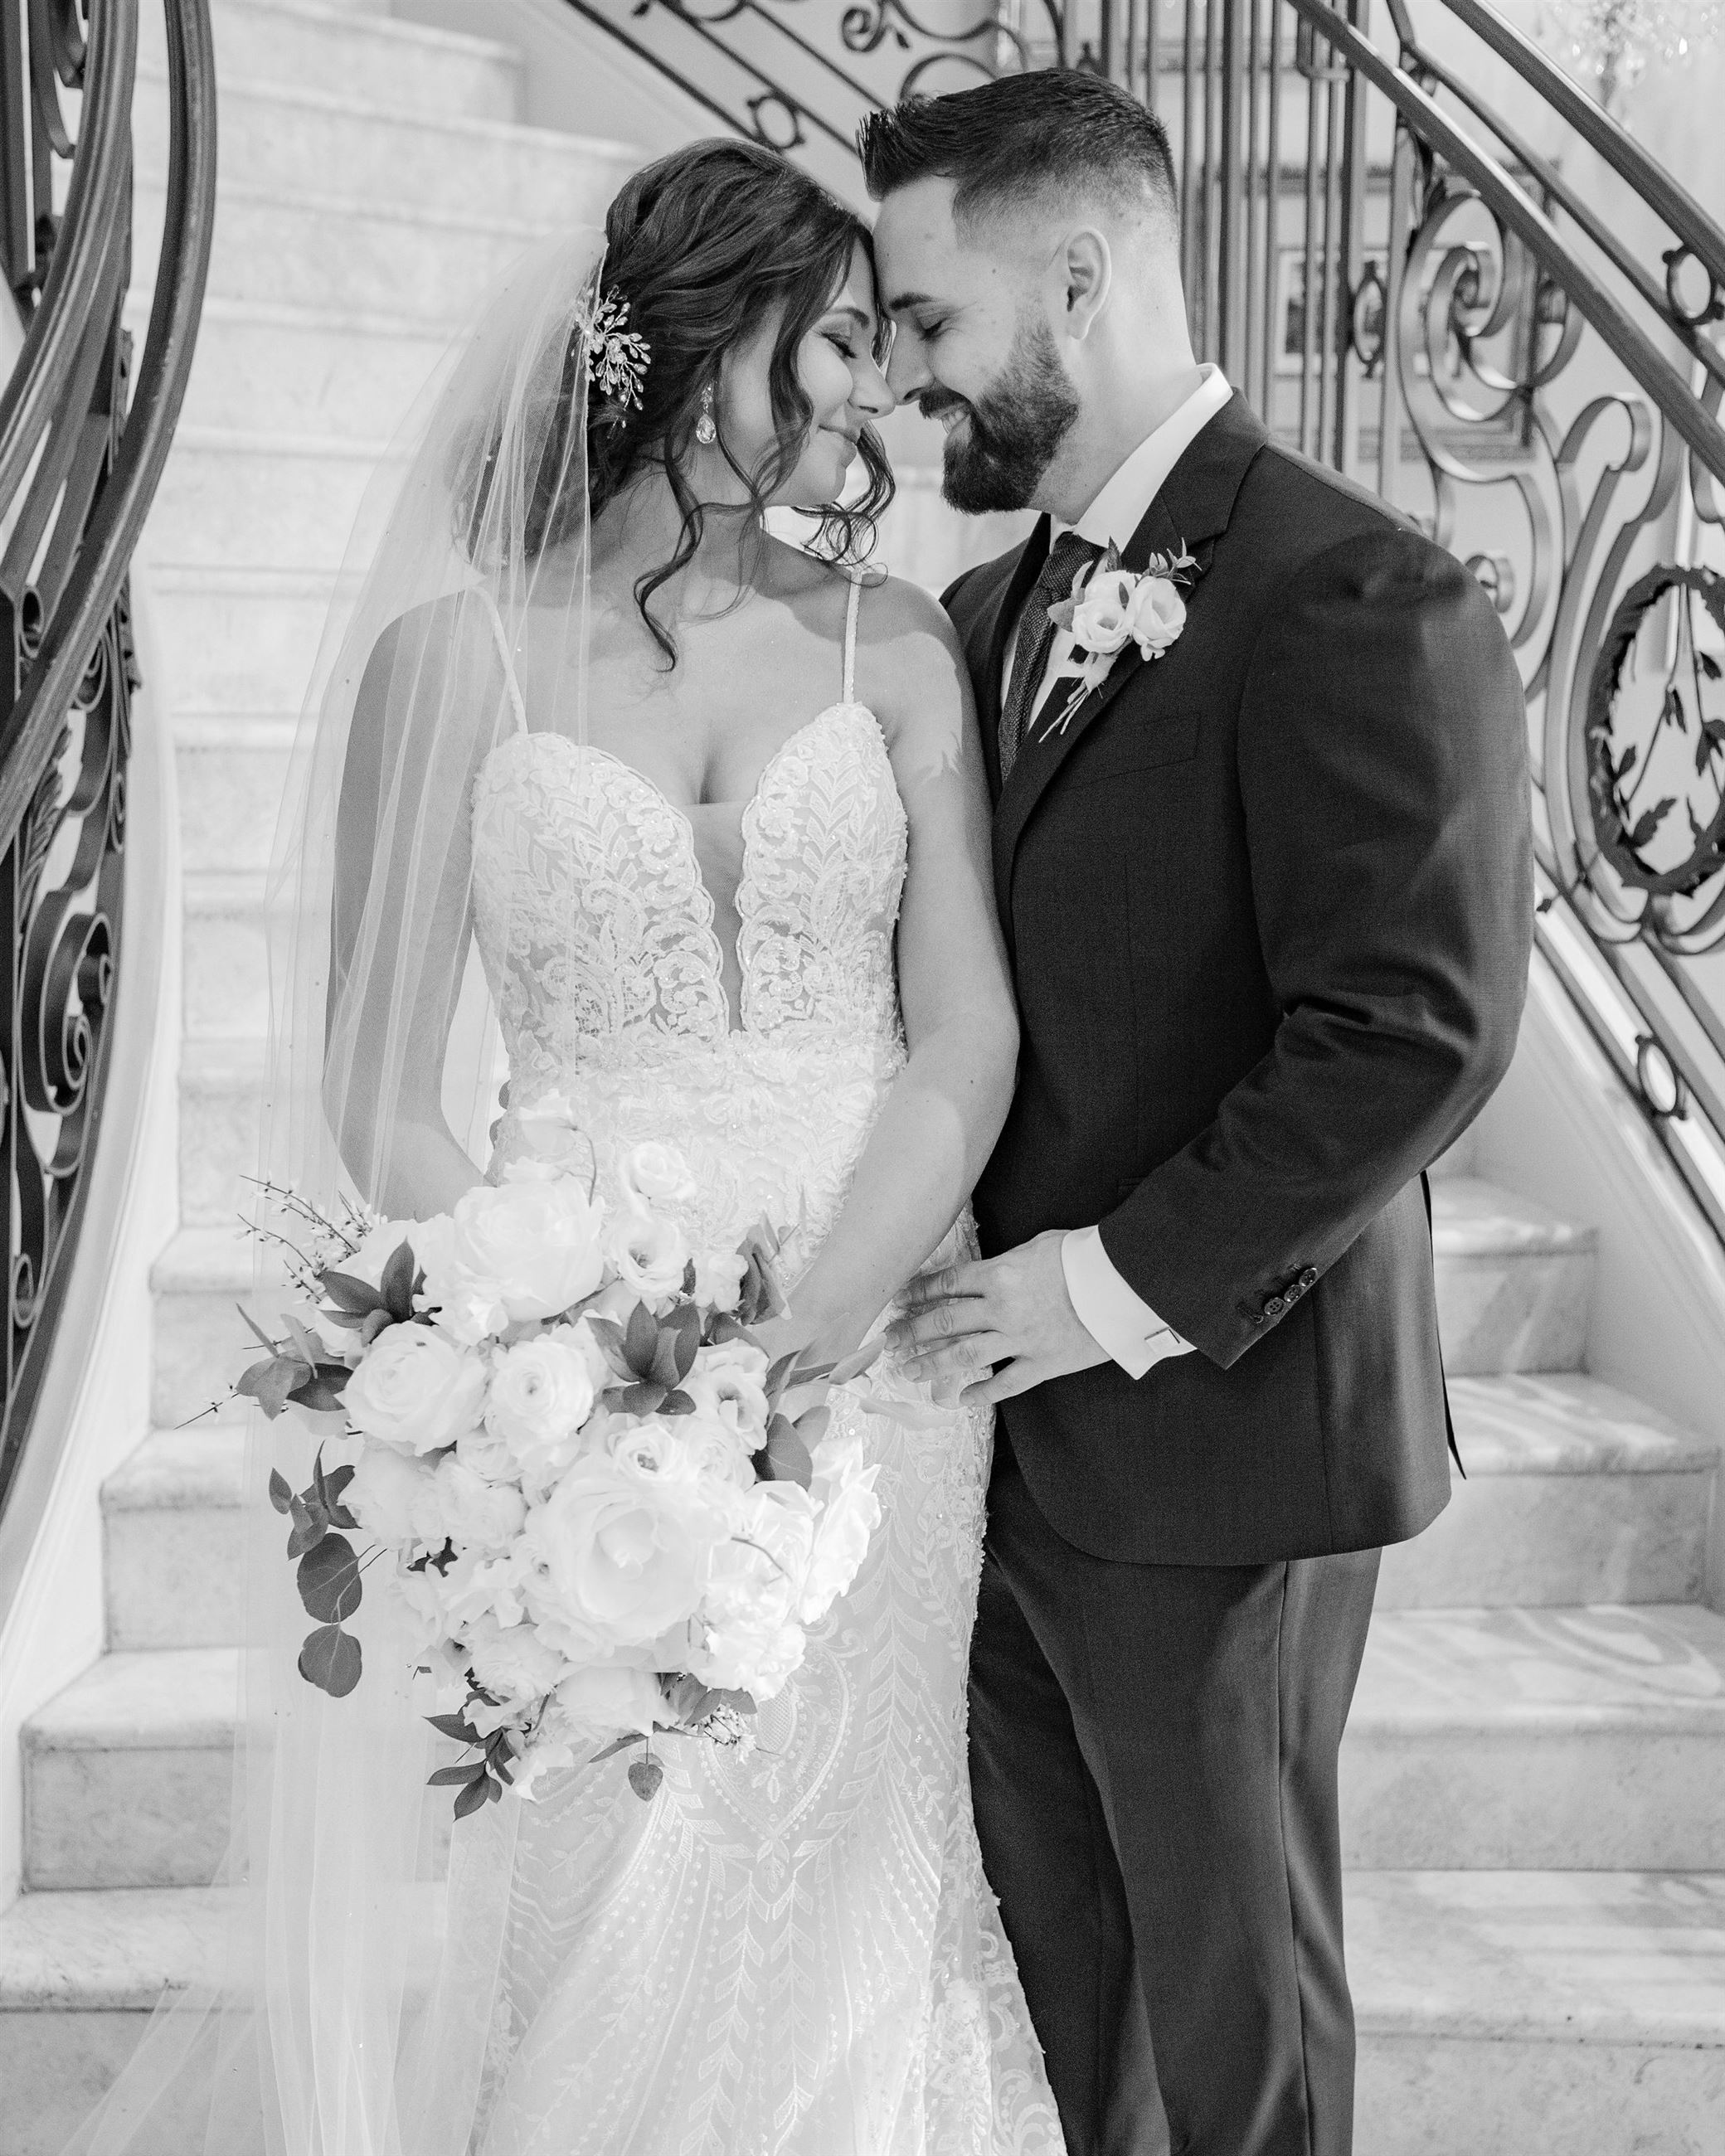 Black and white image of bride and groom on wedding day